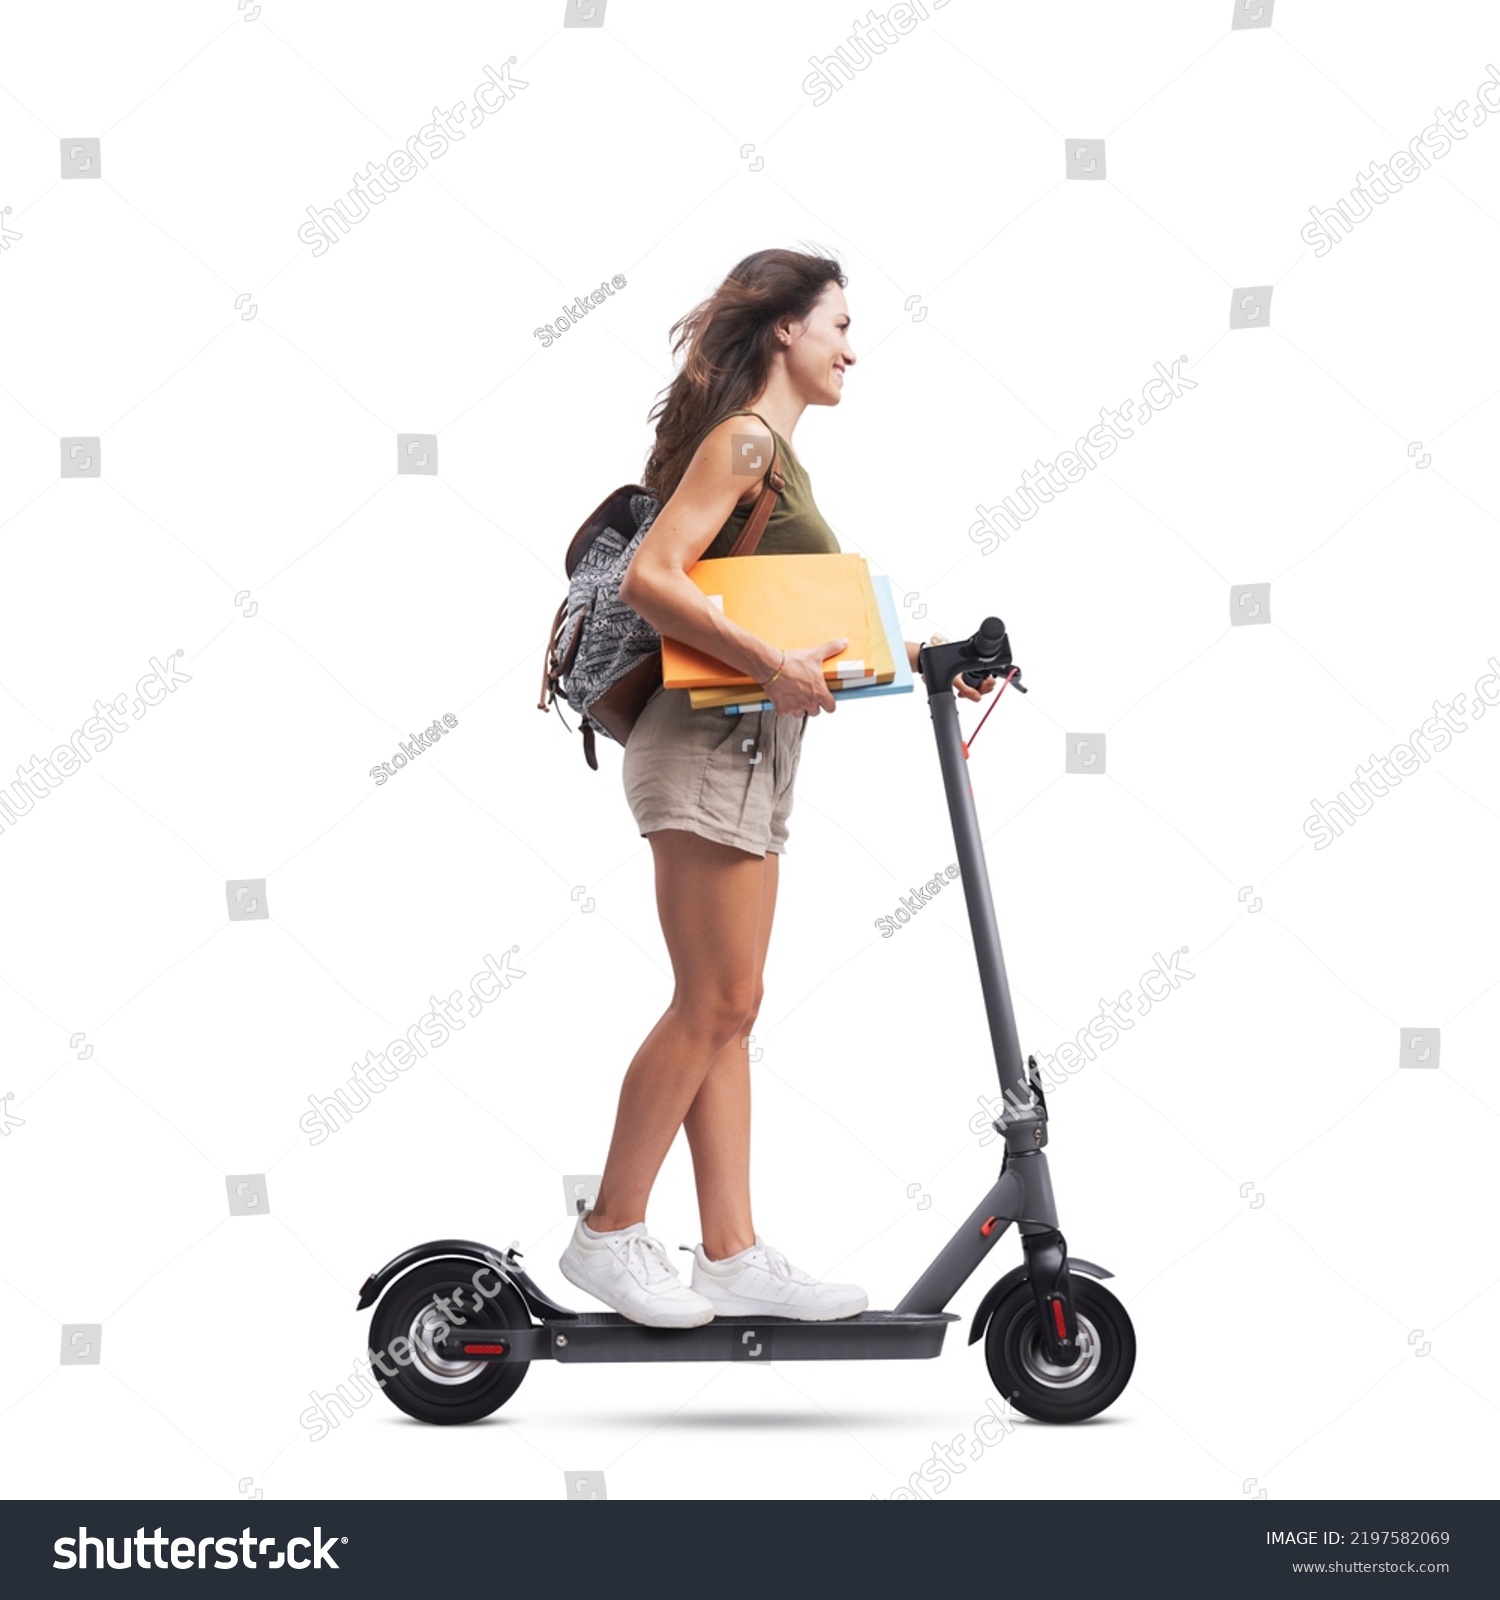 Smiling student with backpack riding an eco-friendly electric scooter, isolated on white background #2197582069